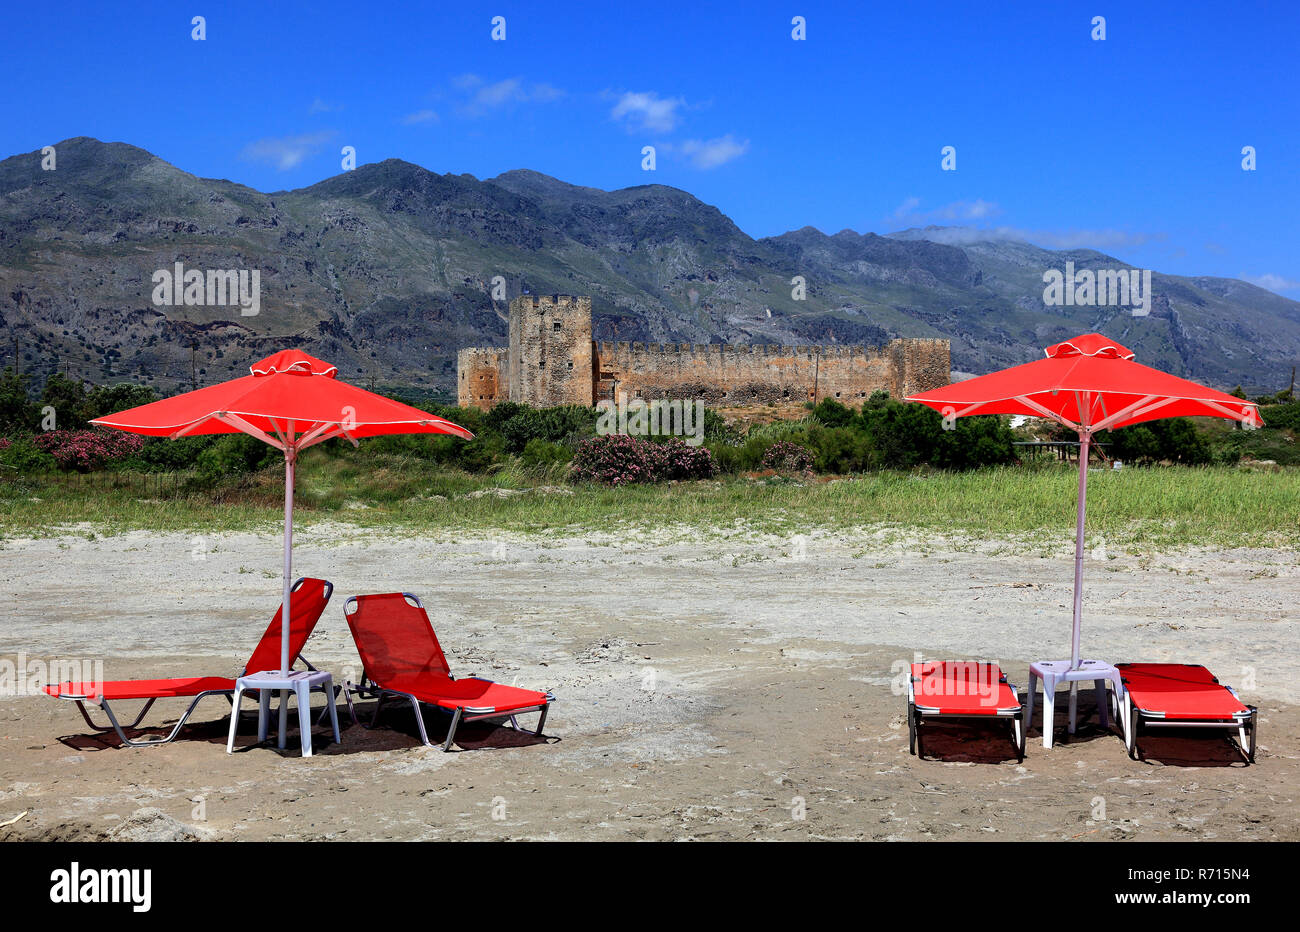 Red sun loungers and parasols in front of Frangokastello castle, Crete, Greece Stock Photo